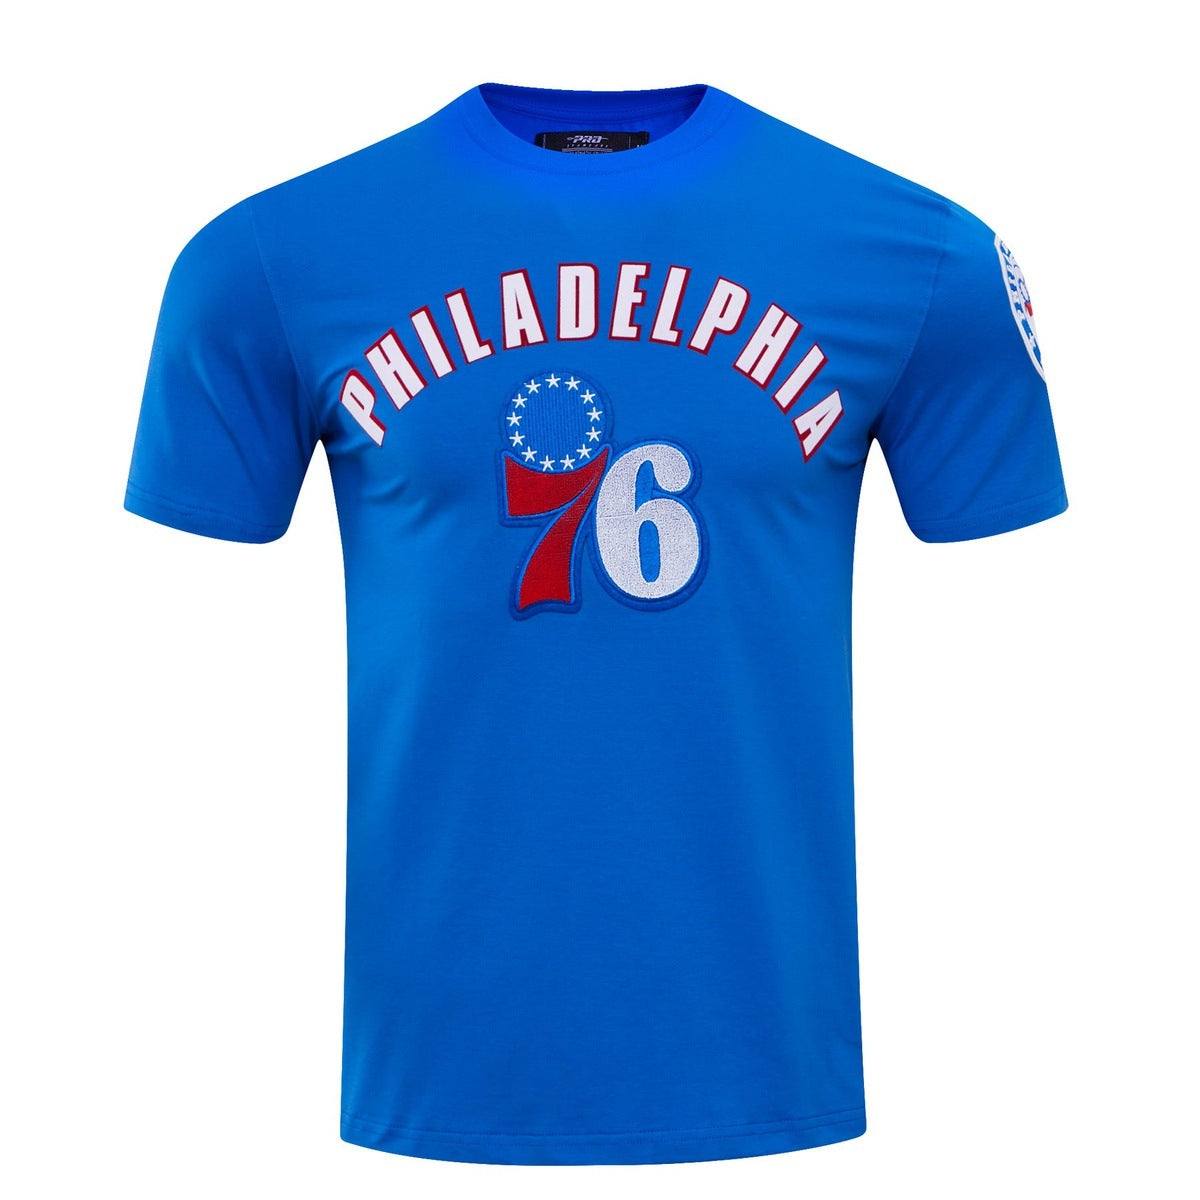 76ers home jersey color